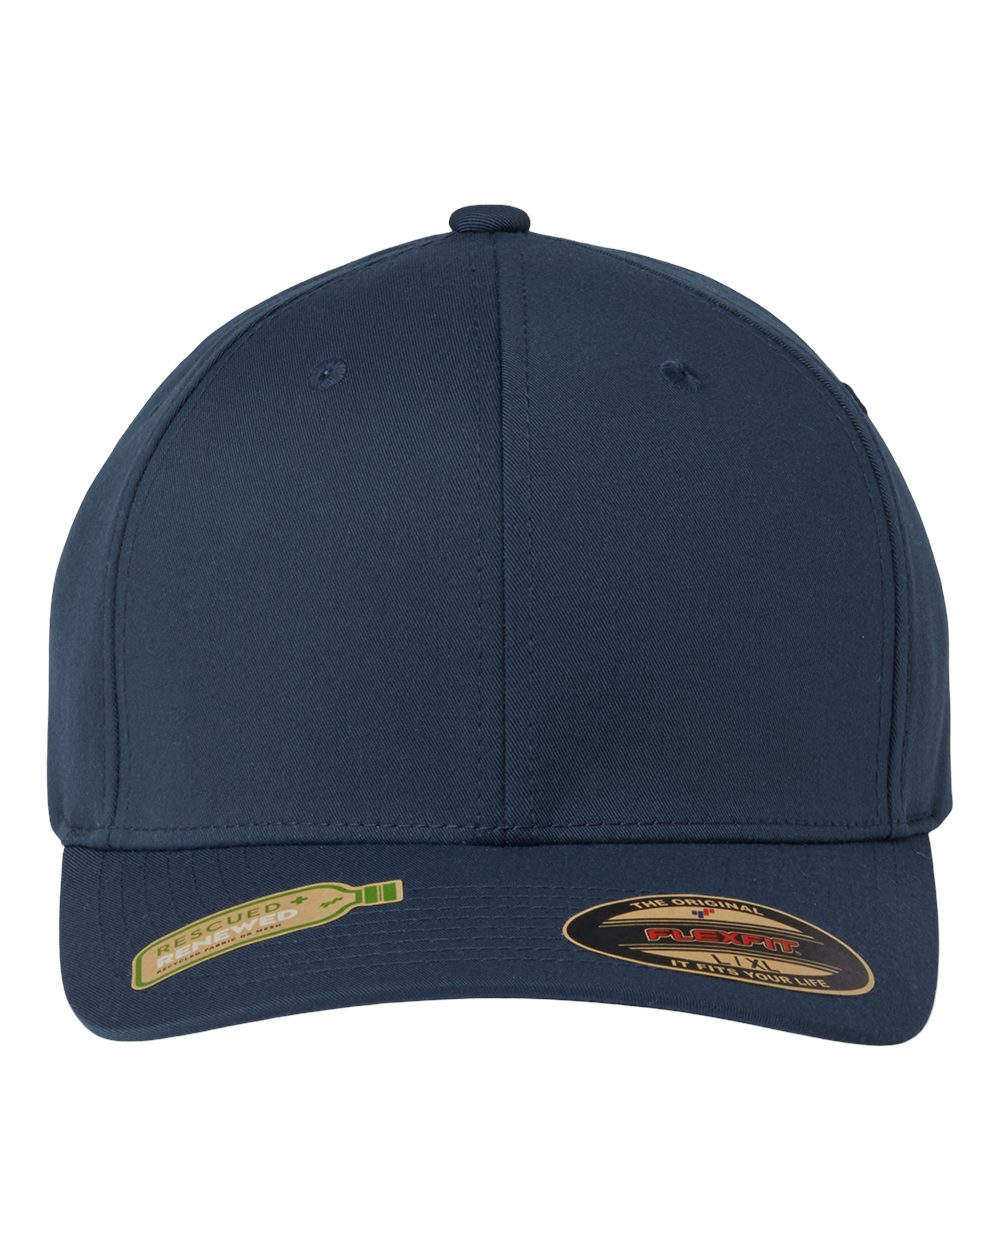 Cap Sustainable - Polyester 6277R Flexfit